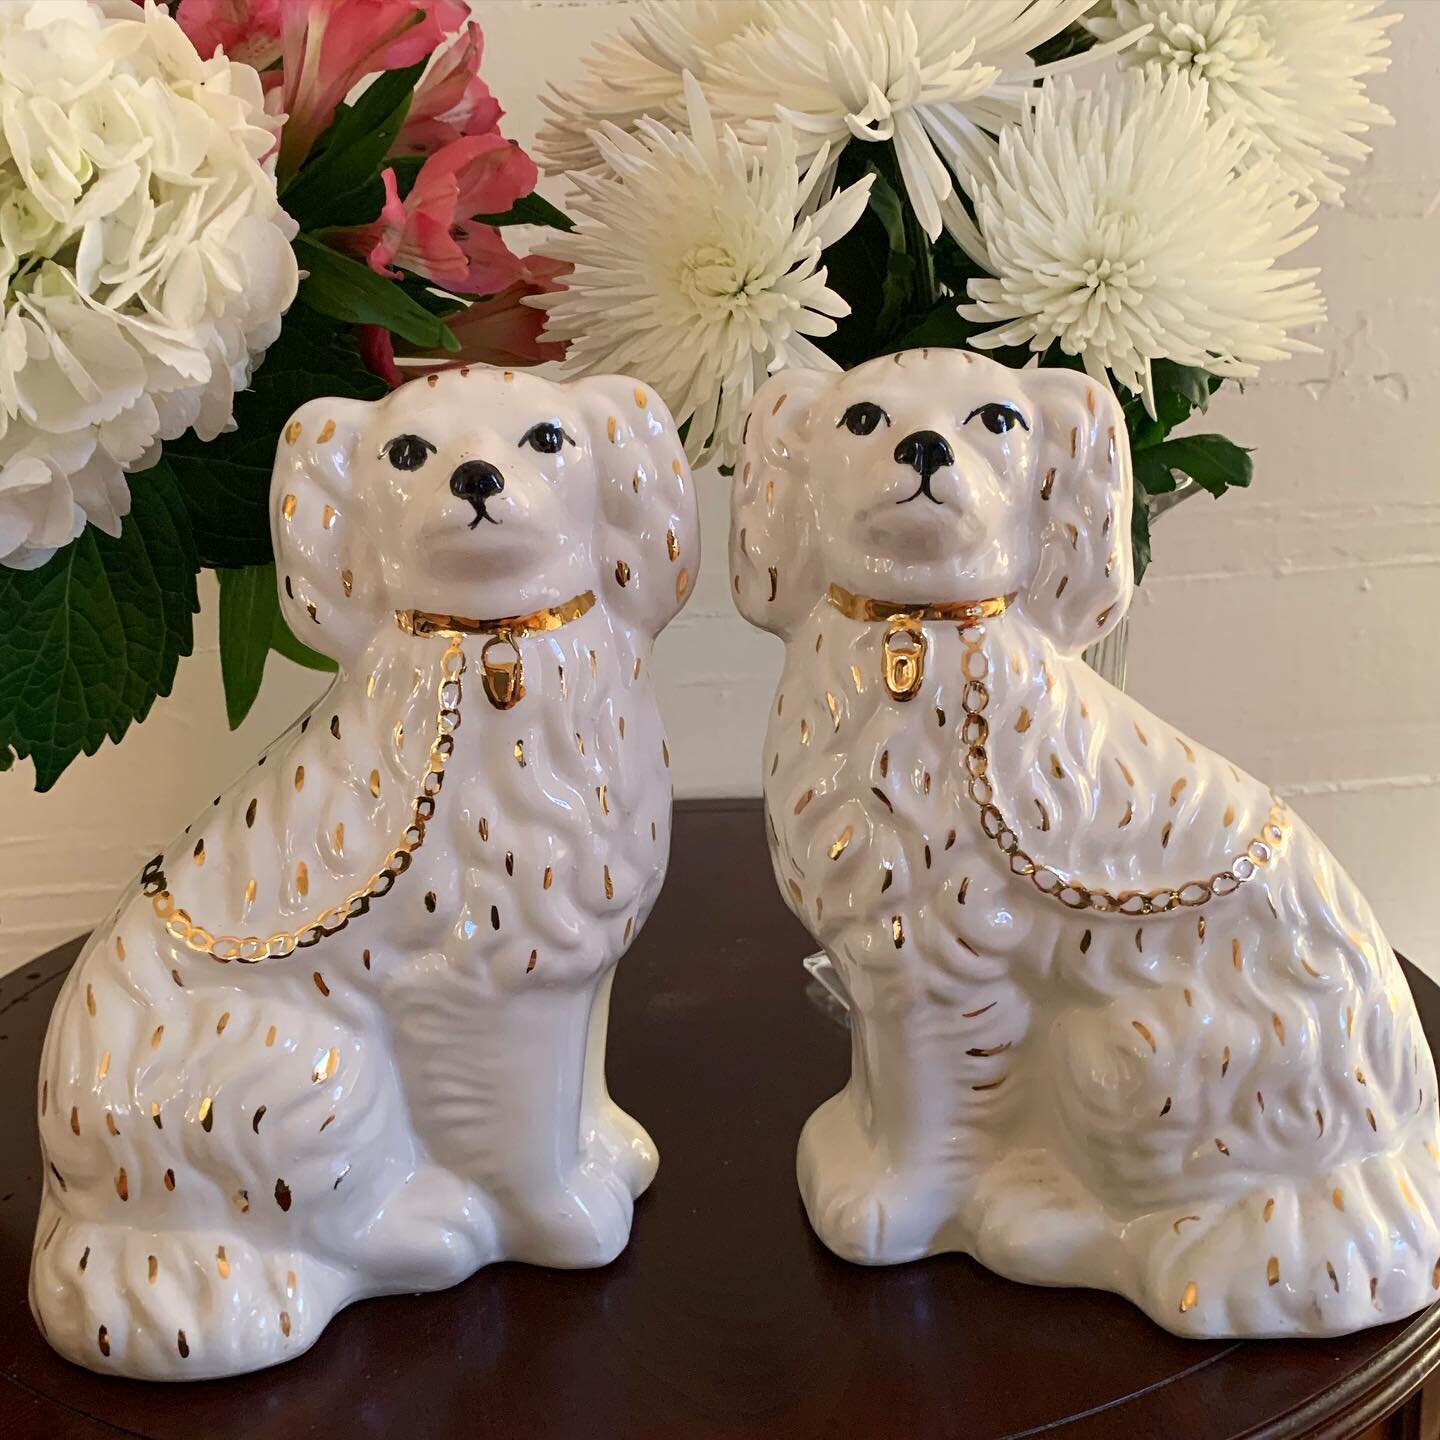 So excited to find this adorable pair of #staffordshire dogs! #thrifted #thrifting #thrifter #thriftscout #thriftshopping #thriftshopper #thriftshopfinds #thriftstore #thriftstorefinds #interiordesign #thriftstyle #traditionalstyle #traditionalhome #